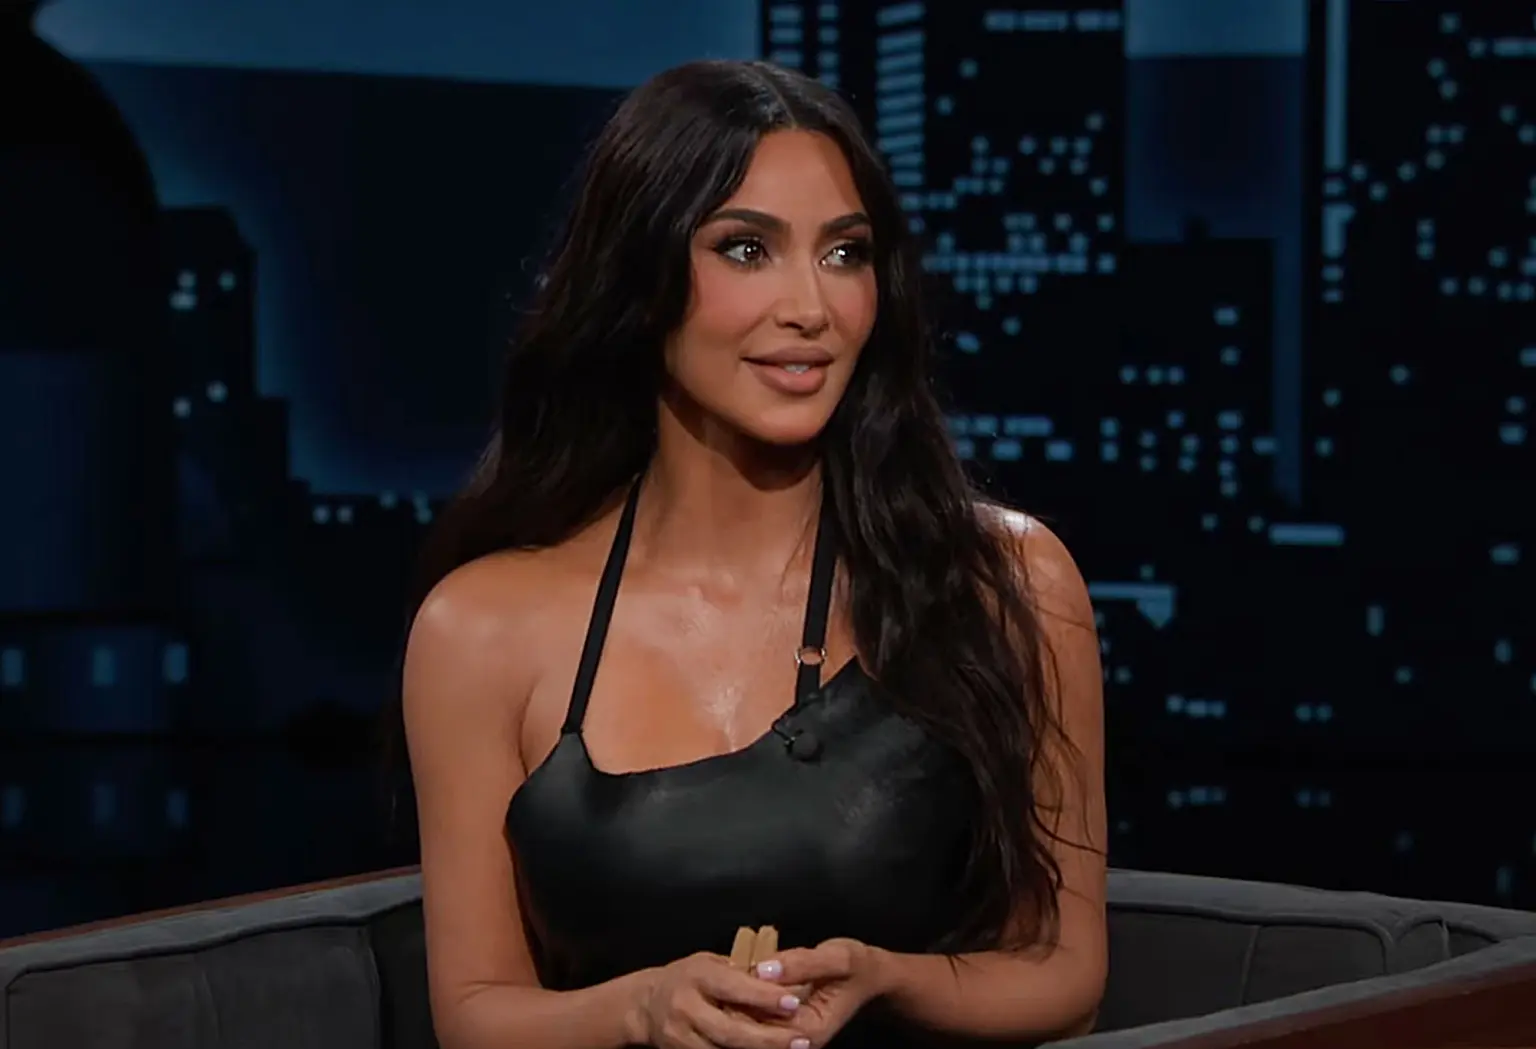 Kim Kardashian Responds To Taylor Swift Diss Track And She’s Not Happy